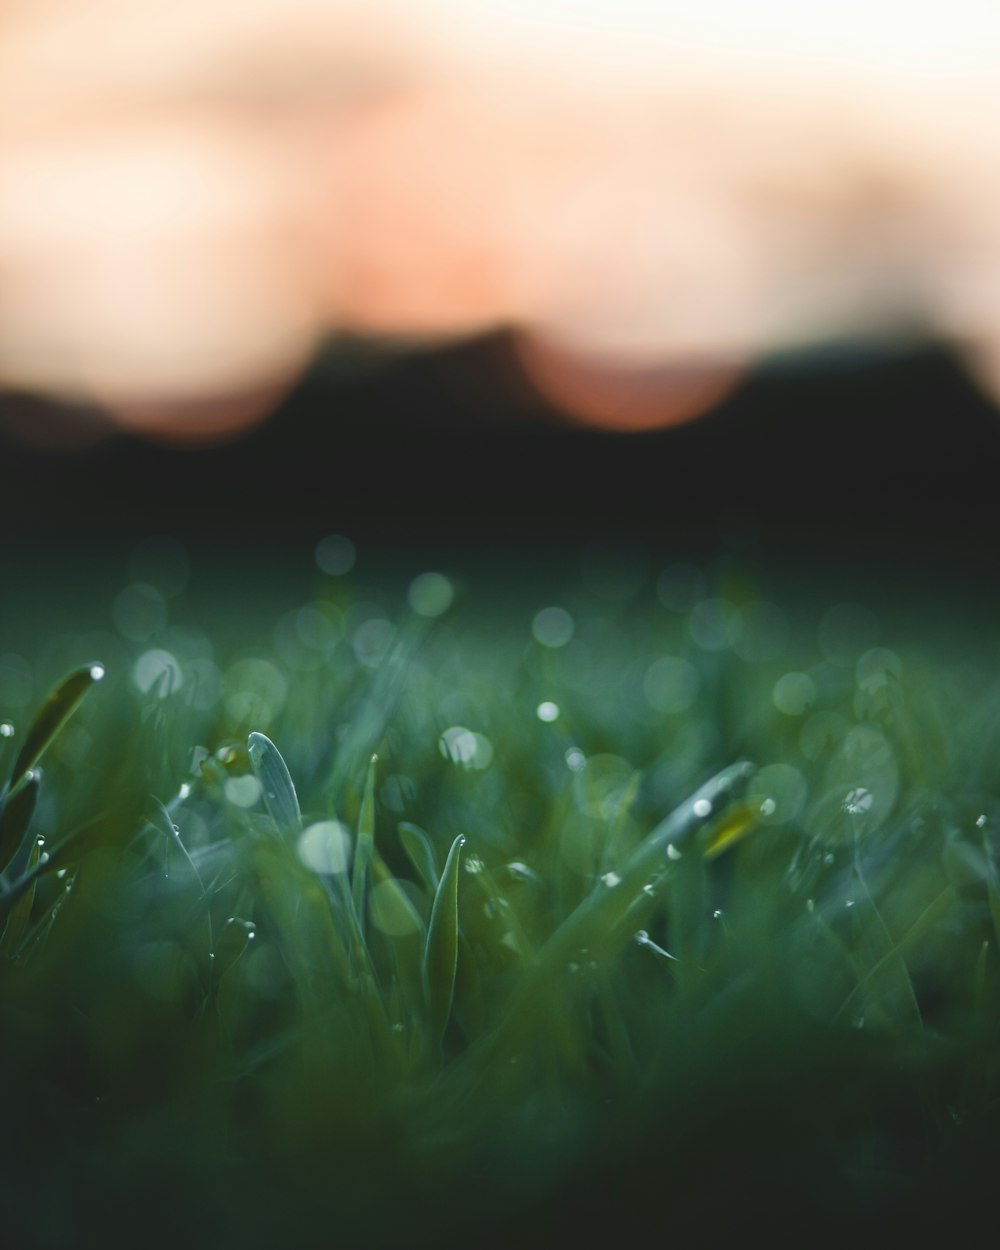 a blurry photo of grass with drops of water on it